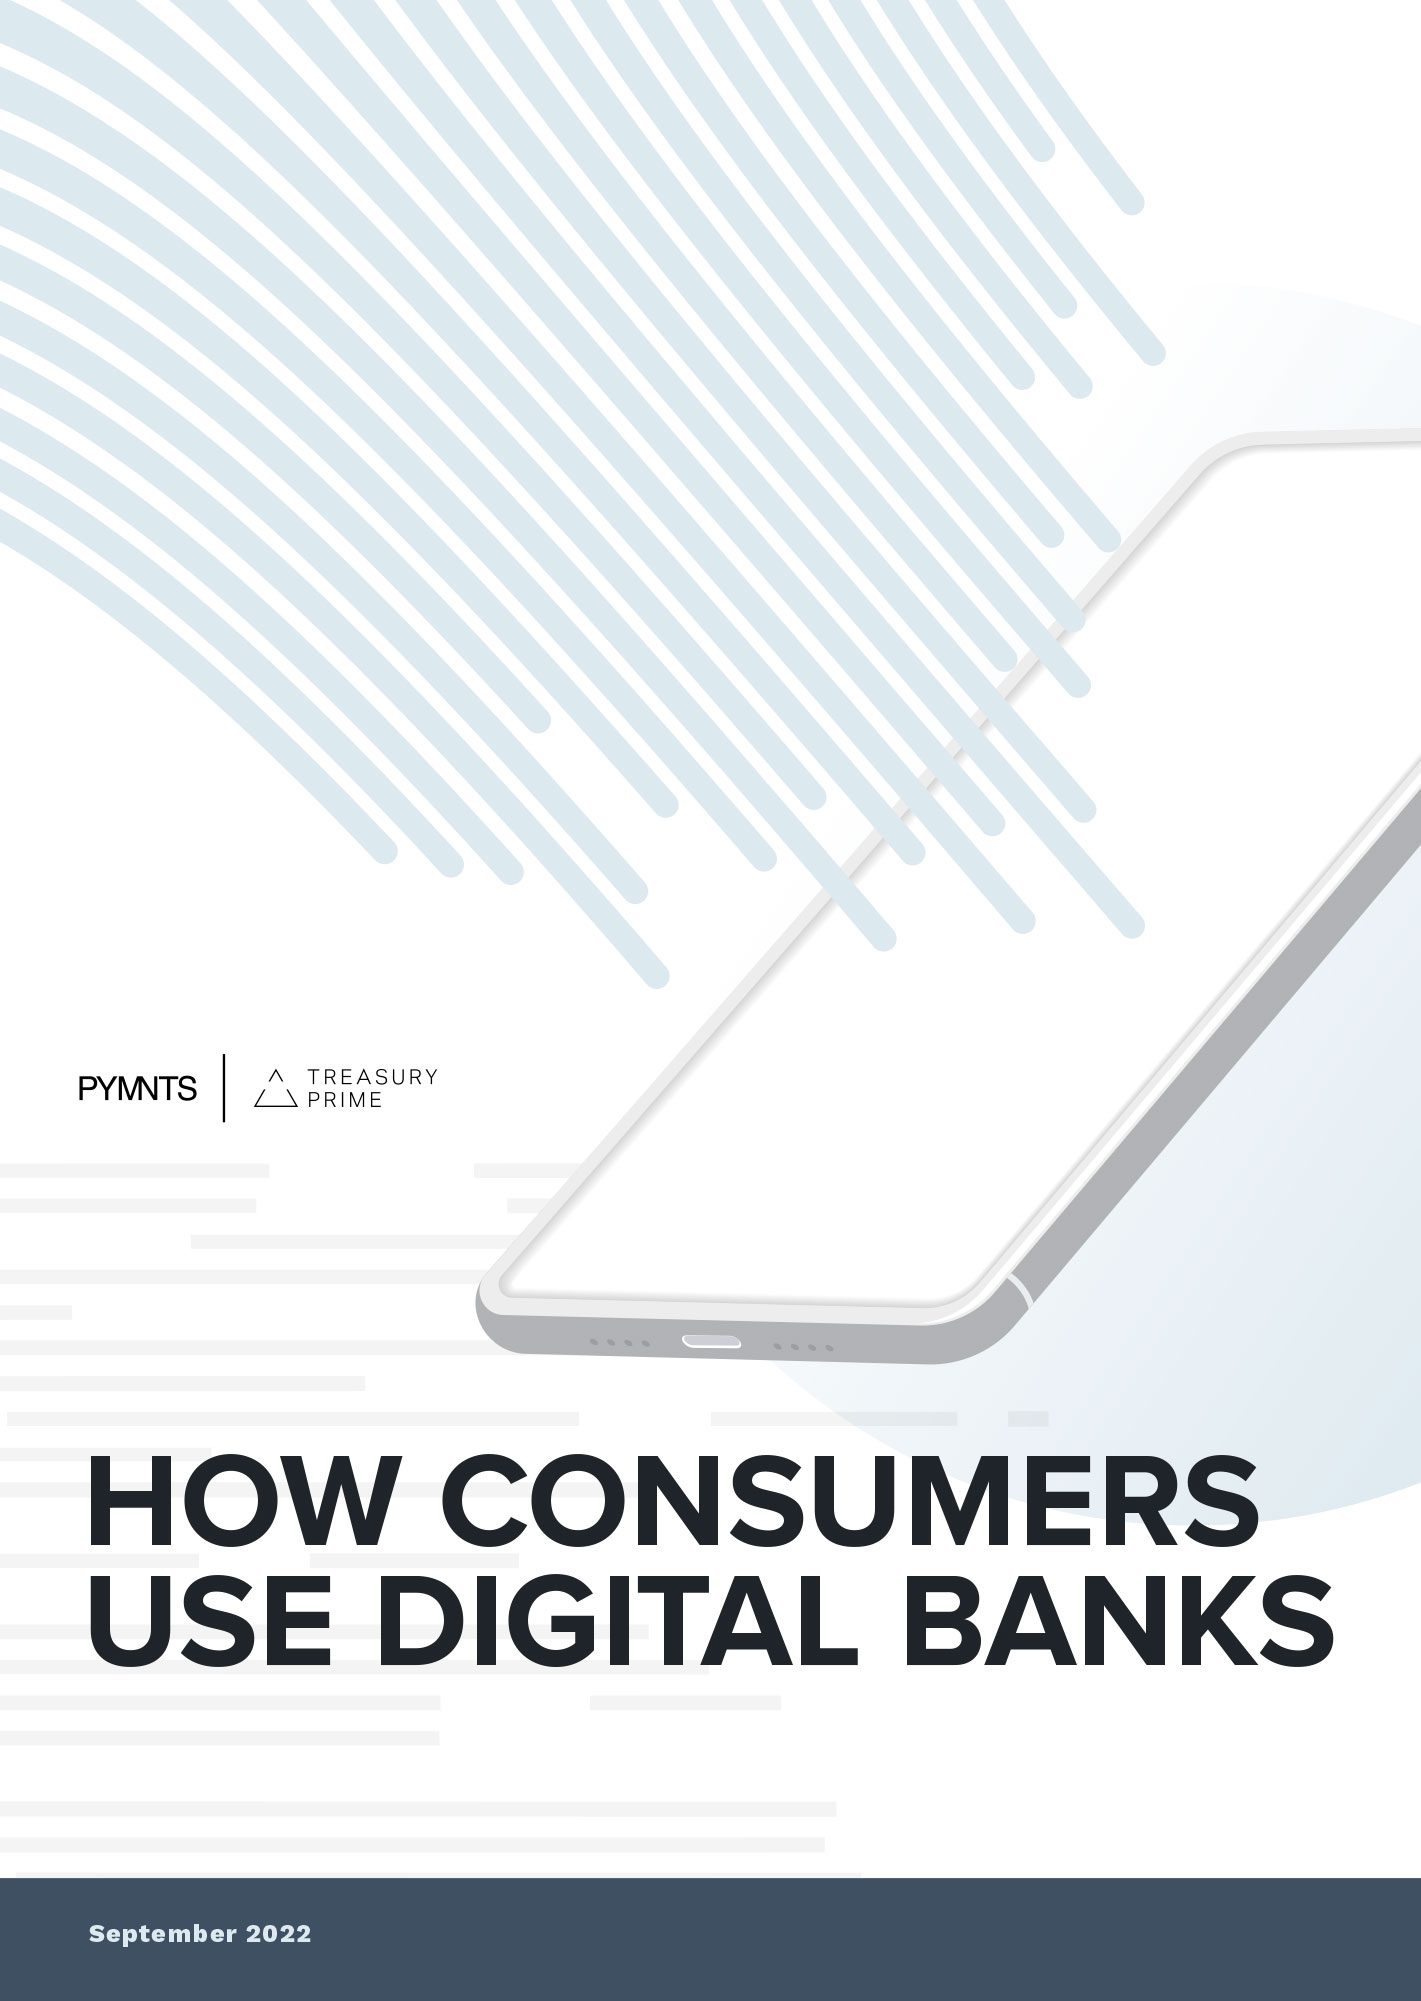 How consumers use digital banks